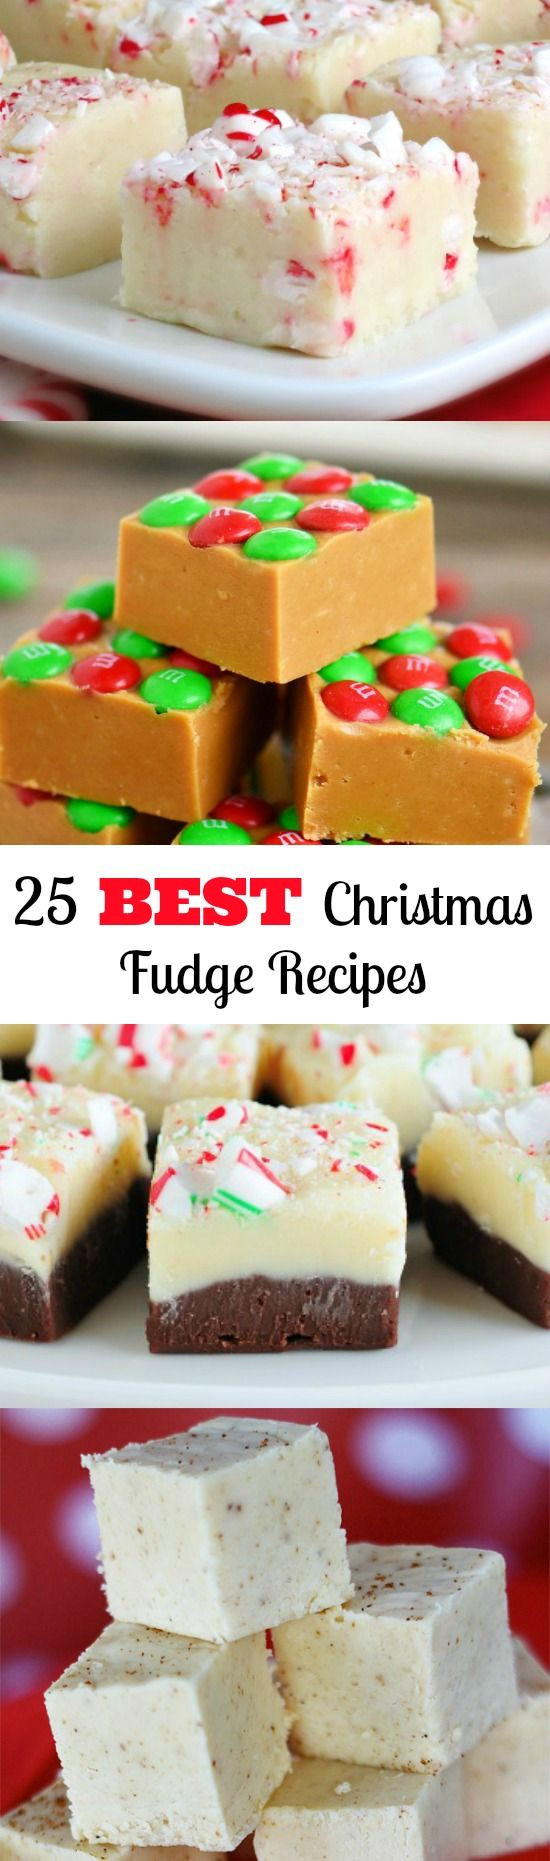 Best Fudge Recipes For Christmas
 17 Best ideas about Christmas Goo s on Pinterest